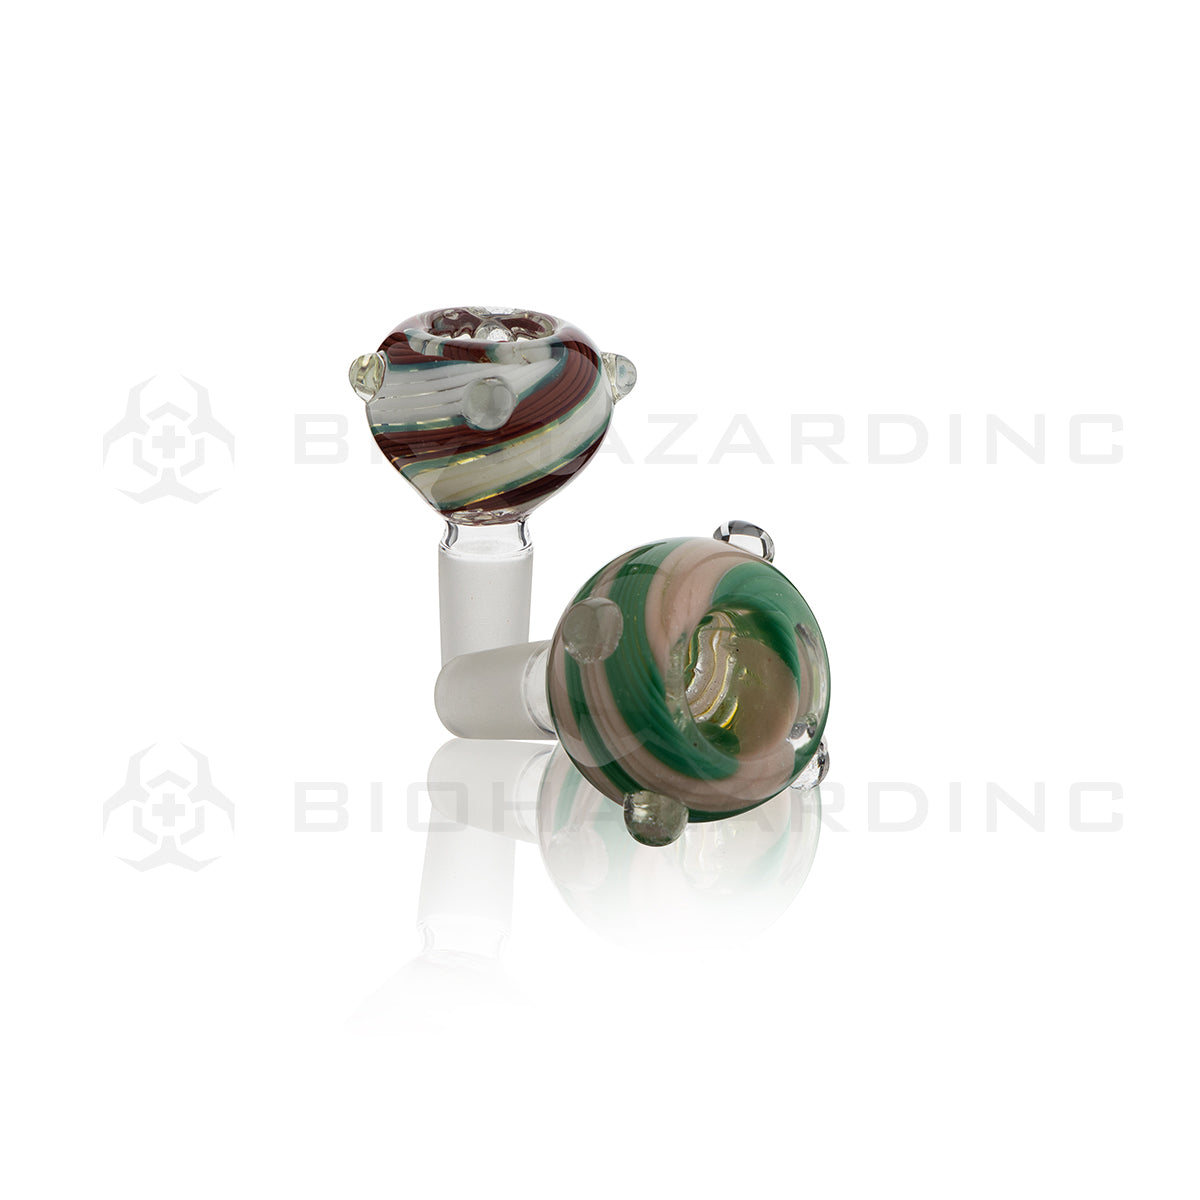 Bowl | Candy Cane Swirl Frit Bowl | 14mm - Assorted Colors 5 Count Glass Bowl Biohazard Inc   